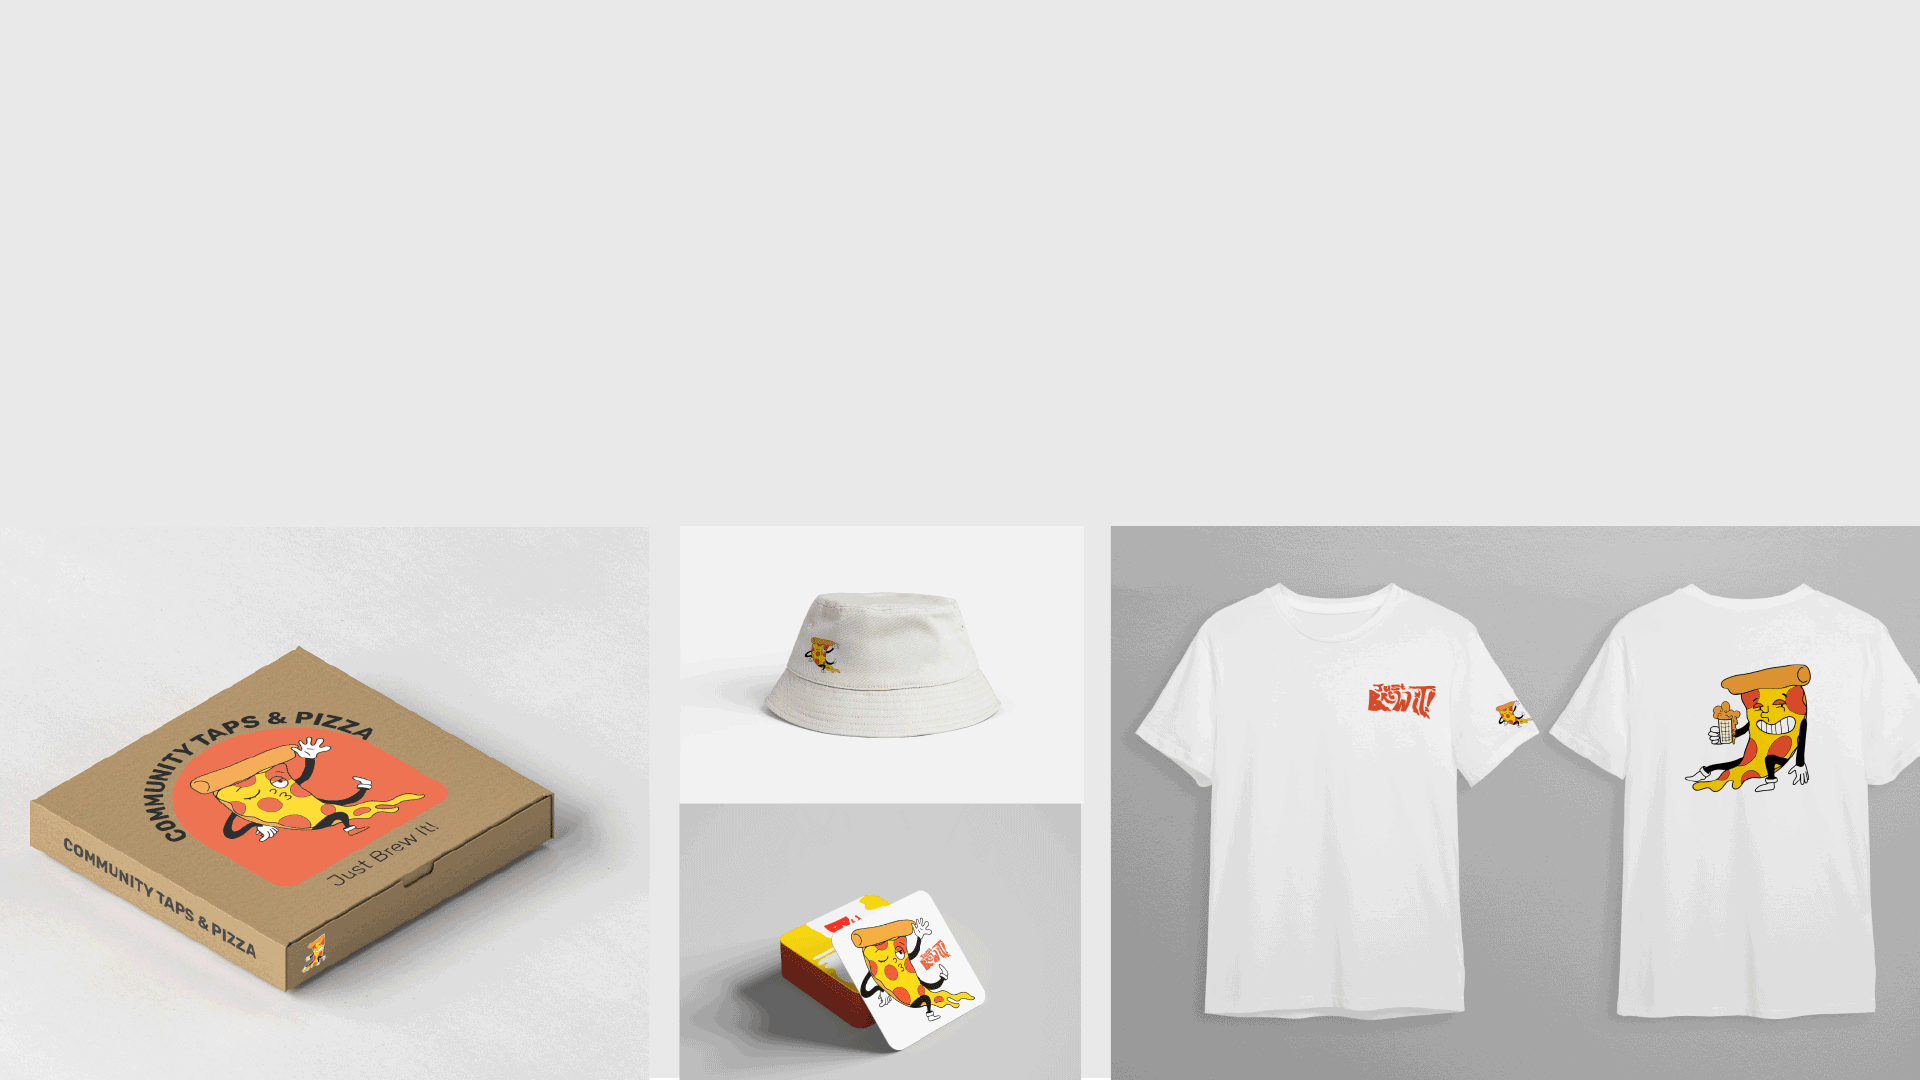 GIF of a mural from sketches to the final finished digital files with still images of collateral under the GIF. Collateral includes a pizza box, bucket hat, coasters, and teeshirts with the pizza illustration on them.